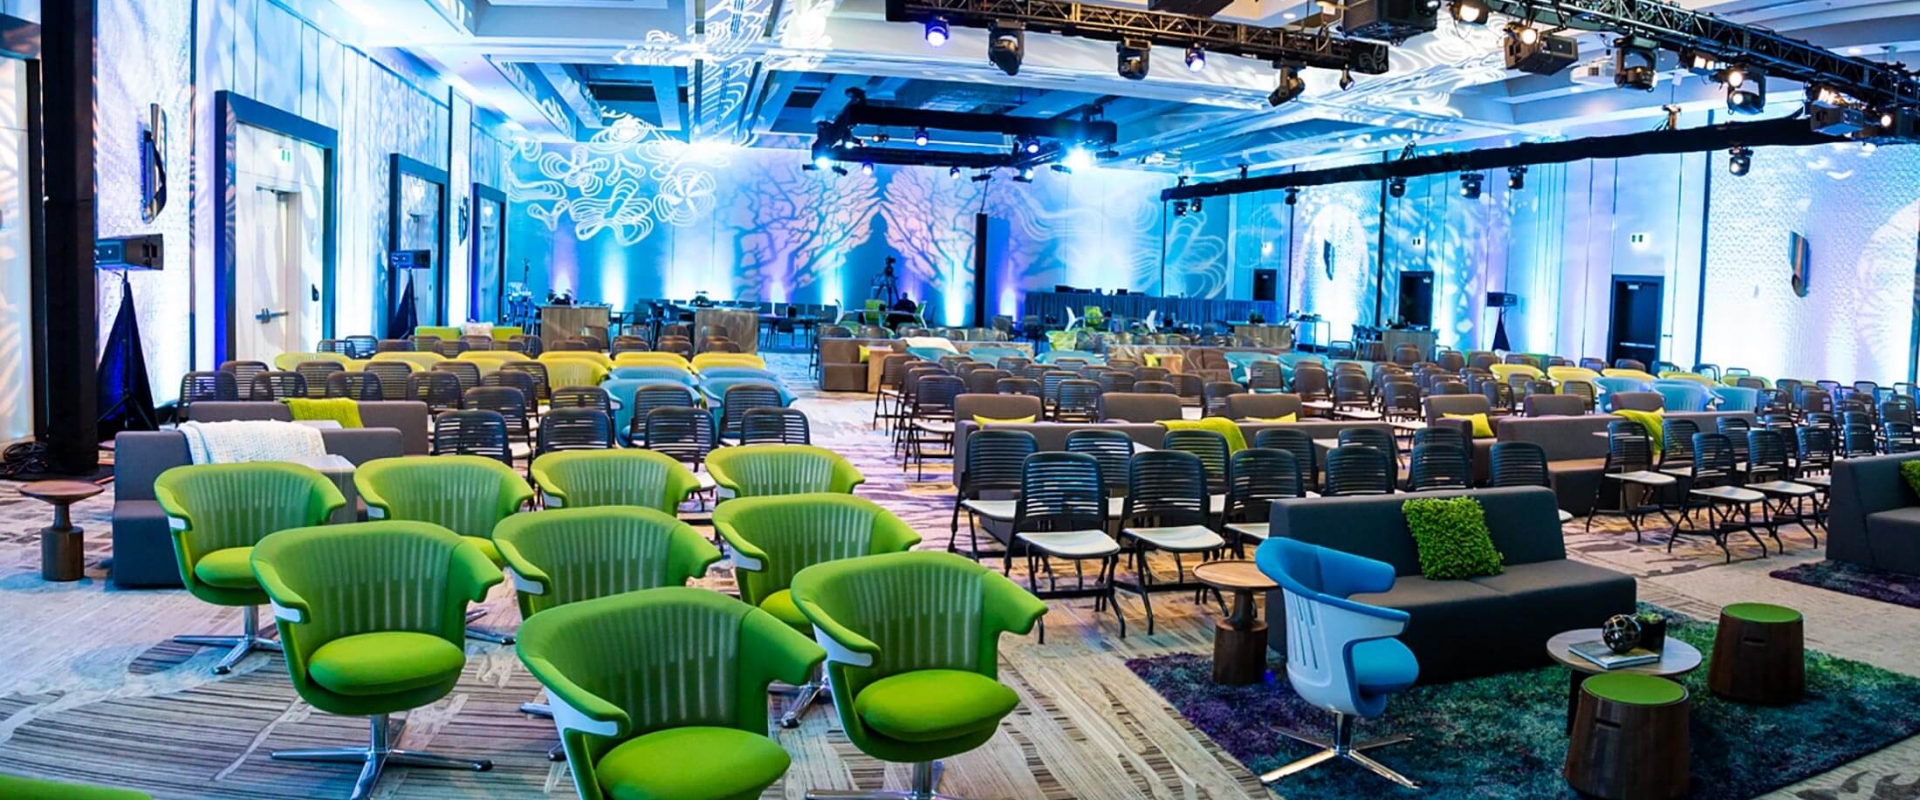 Parq Vancouver grand ballroom with rows of chairs at long tables